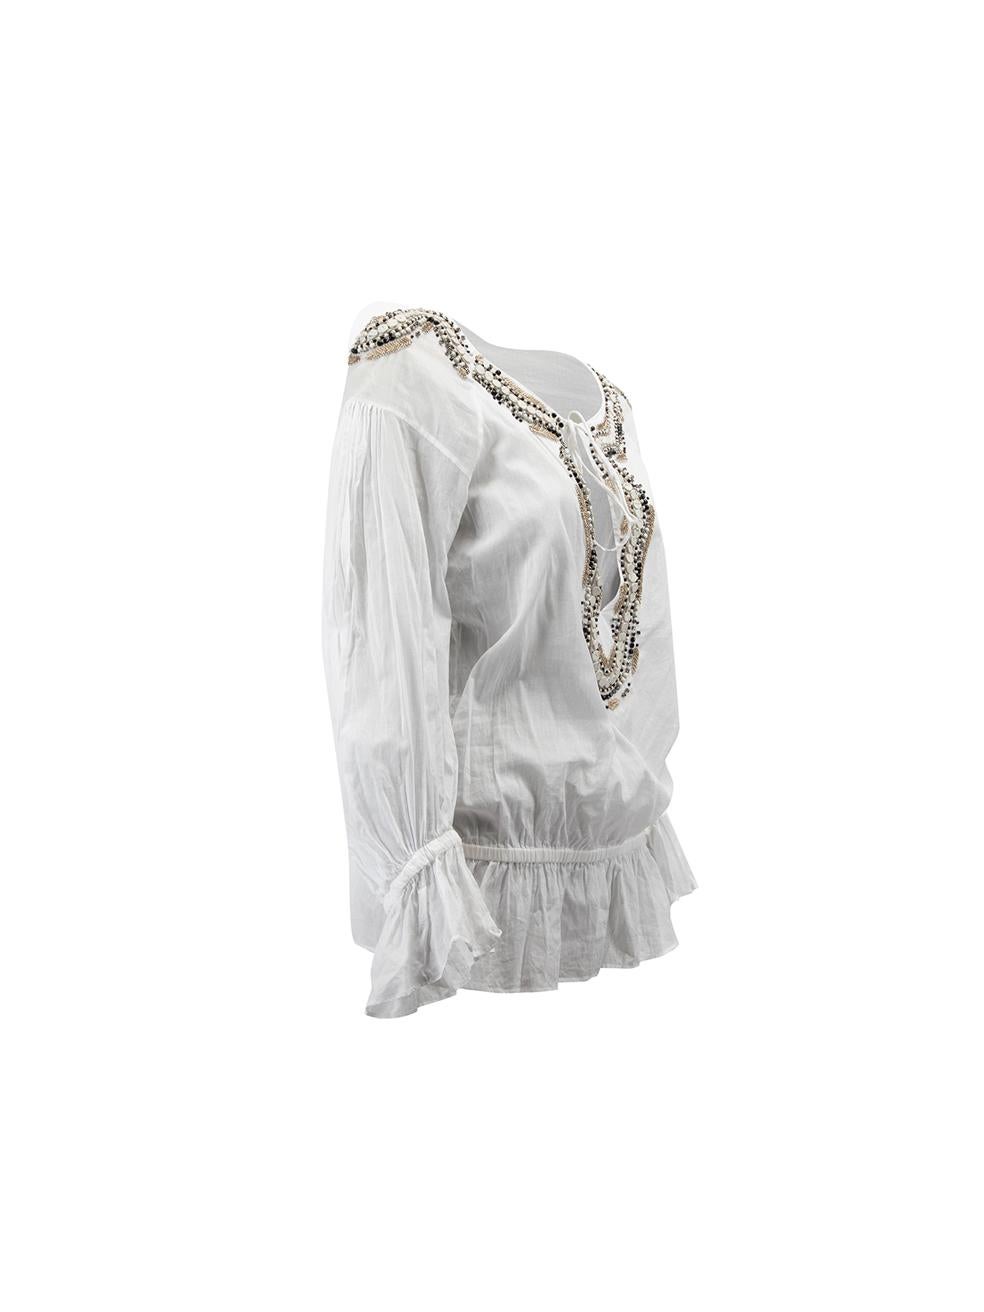 CONDITION is Very good. Minimal wear to blouse is evident. Minimal loose threads around the beading and wear to the back of the neckline on this used Roberto Cavalli designer resale item. 



Details


White

Cotton

Long sleeves blouse

Embellished